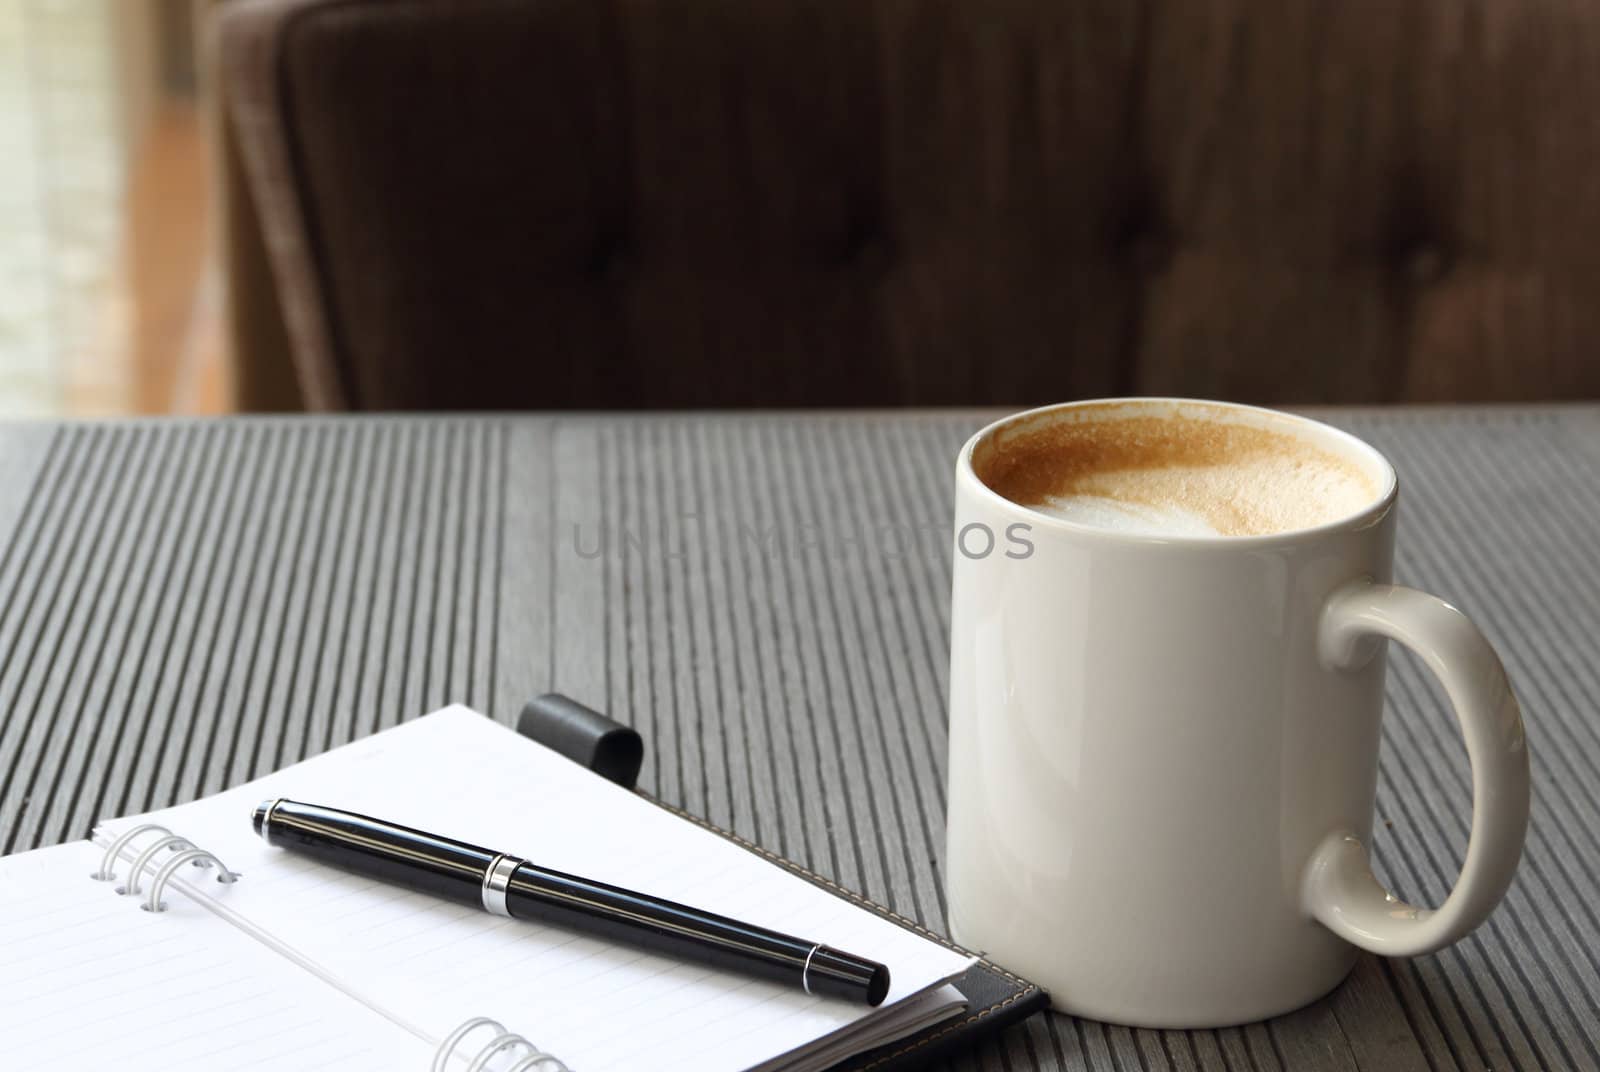 Hot coffee latte in white cup with journal book and pen